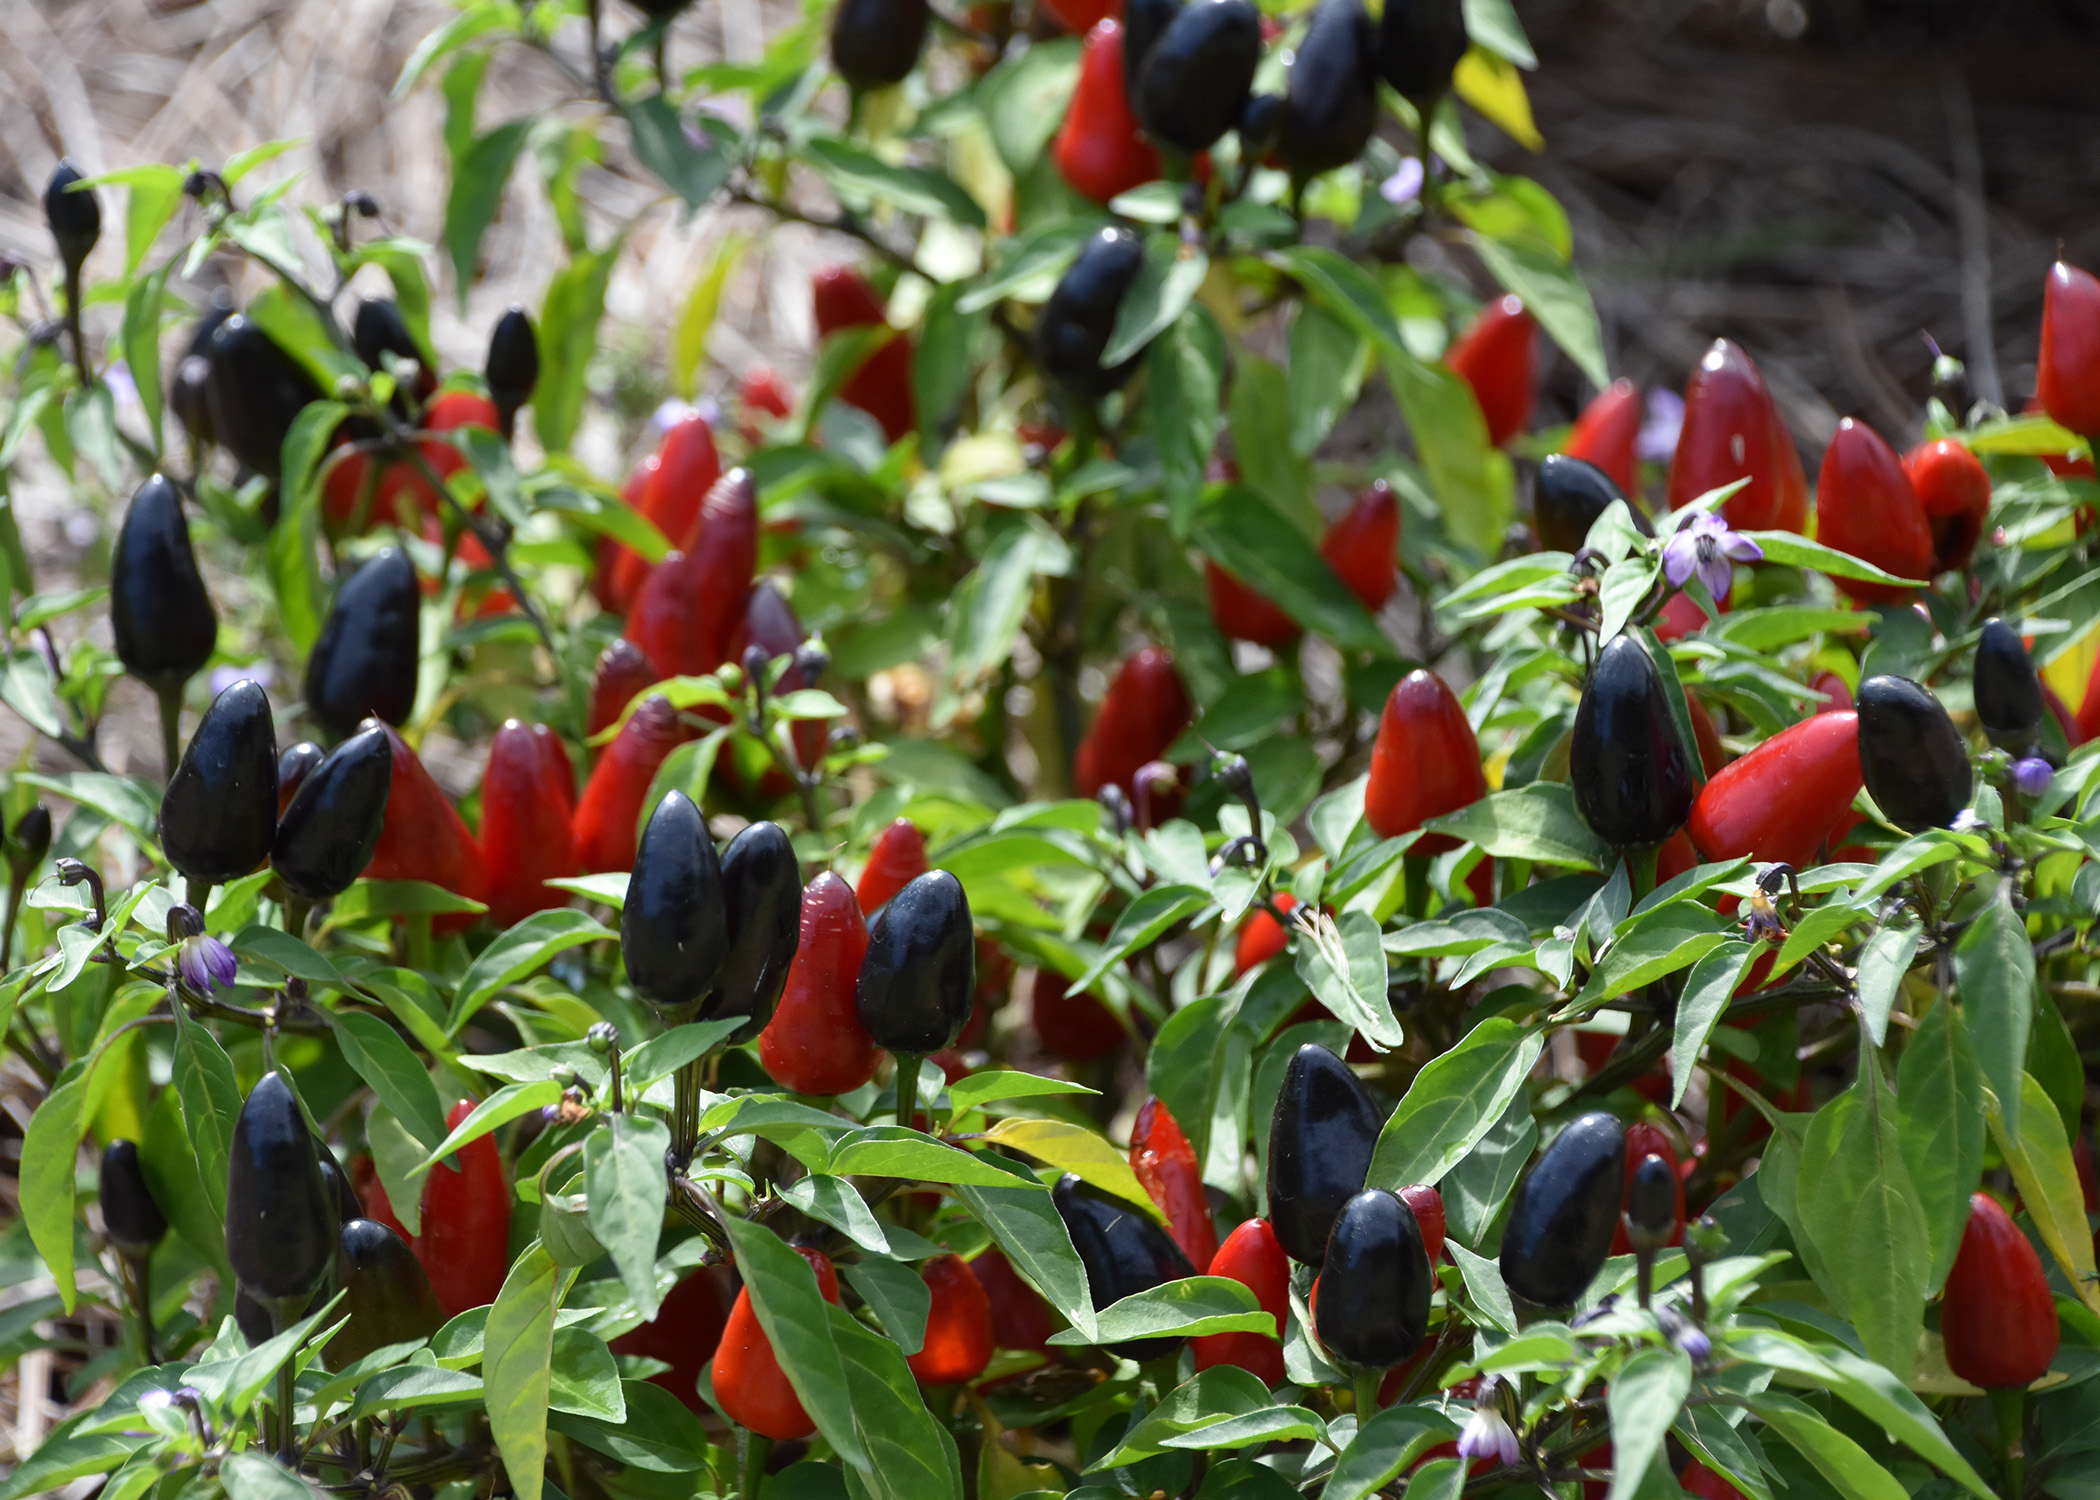 The fruit of the ornamental pepper Black Hawk is held high above the foliage for our viewing enjoyment. (Photo by MSU Extension/Gary Bachman)